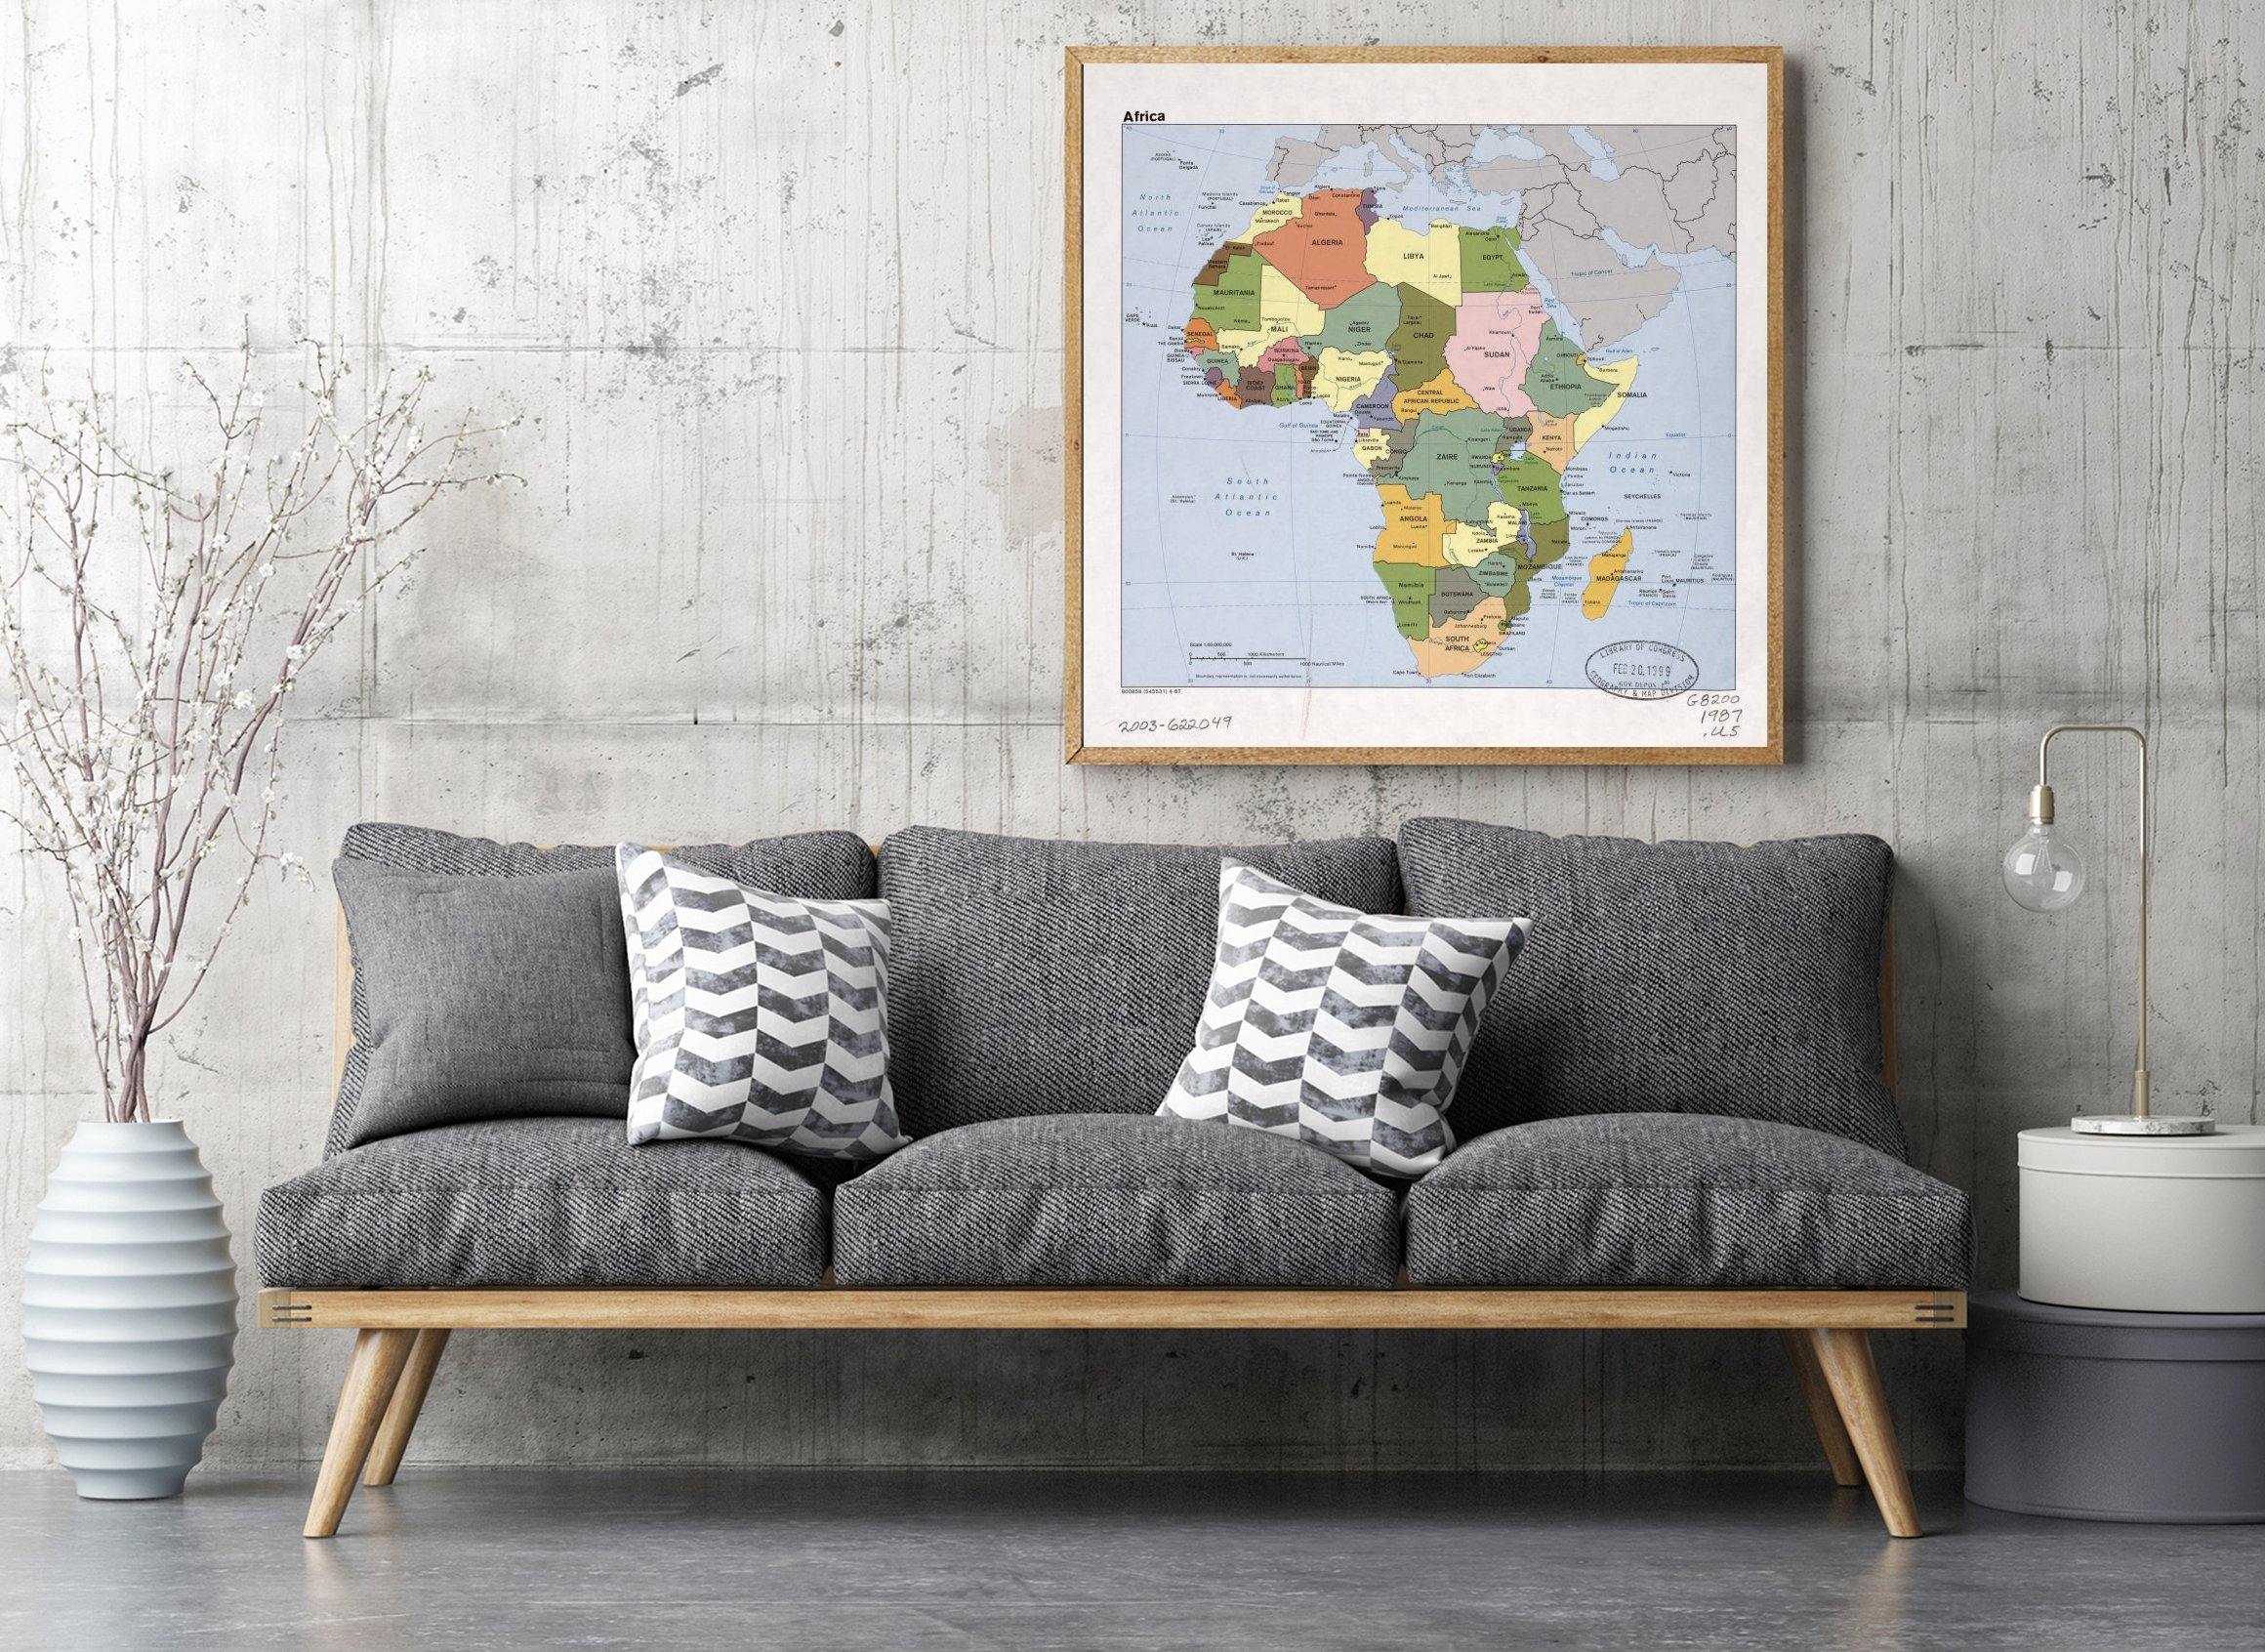 1987 Map| Africa| Africa Map Size: 24 inches x 24 inches |Fits 24x24 s - New York Map Company